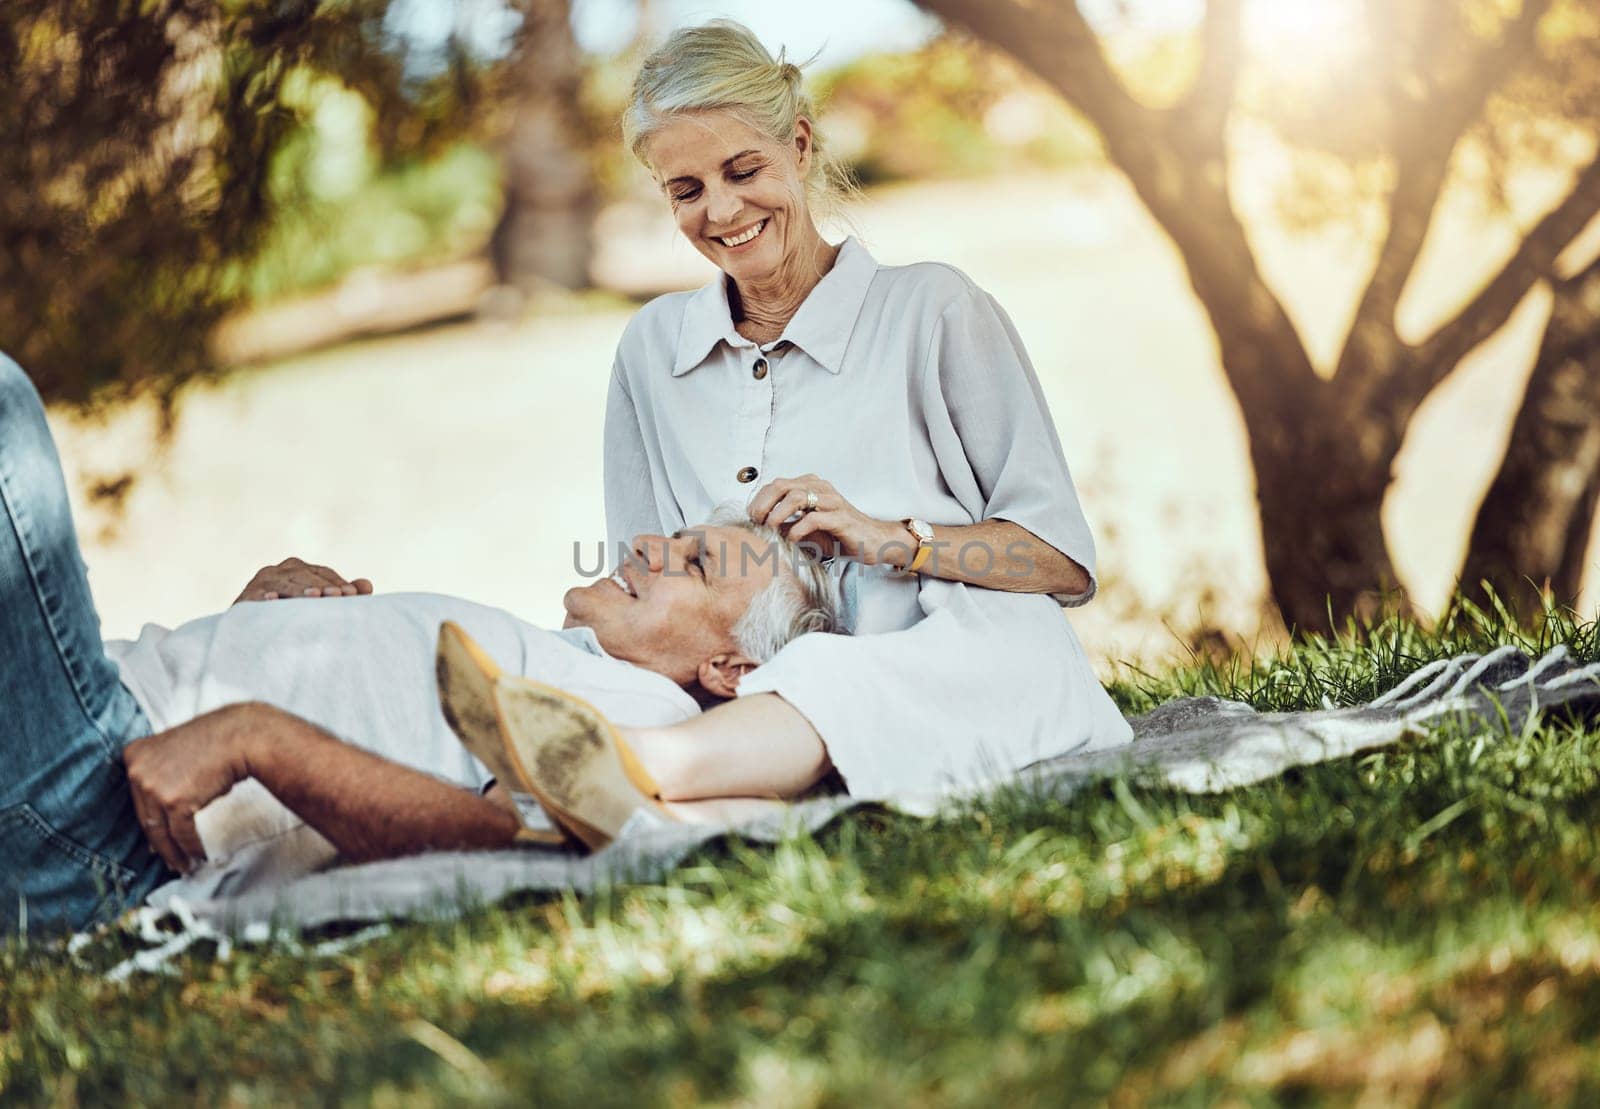 Retirement, love and picnic with a senior couple outdoor in nature to relax on a green field of grass together. Happy, smile and date with a mature man and woman bonding outside for romance.